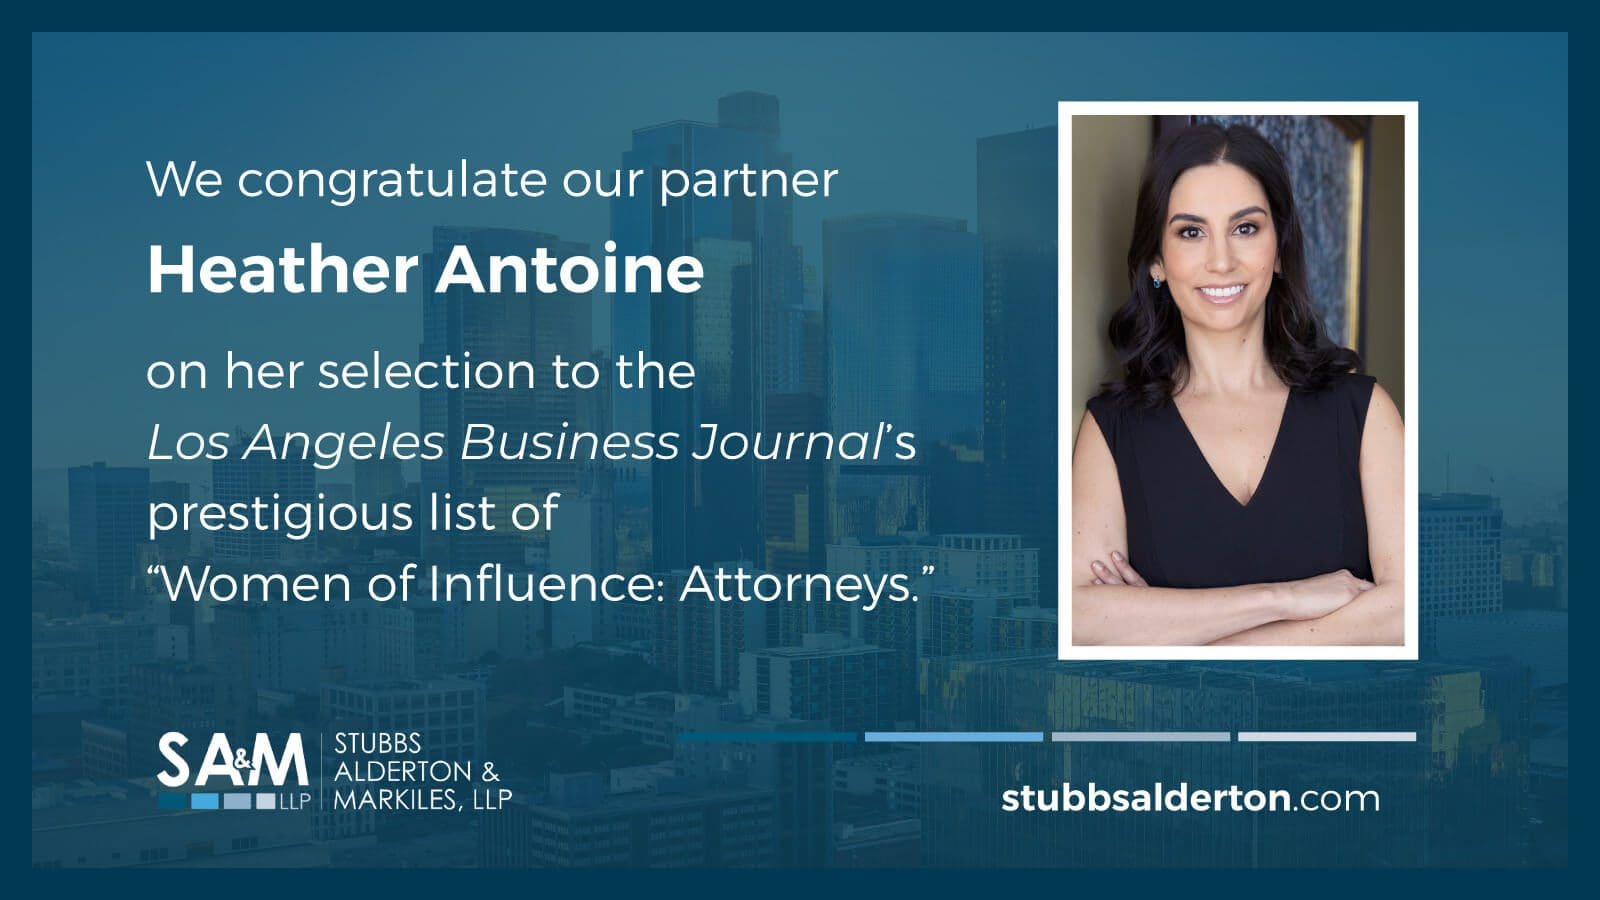 Heather Antoine Selected to Los Angeles Business Journal’s 2022 List of “Women of Influence: Attorneys”